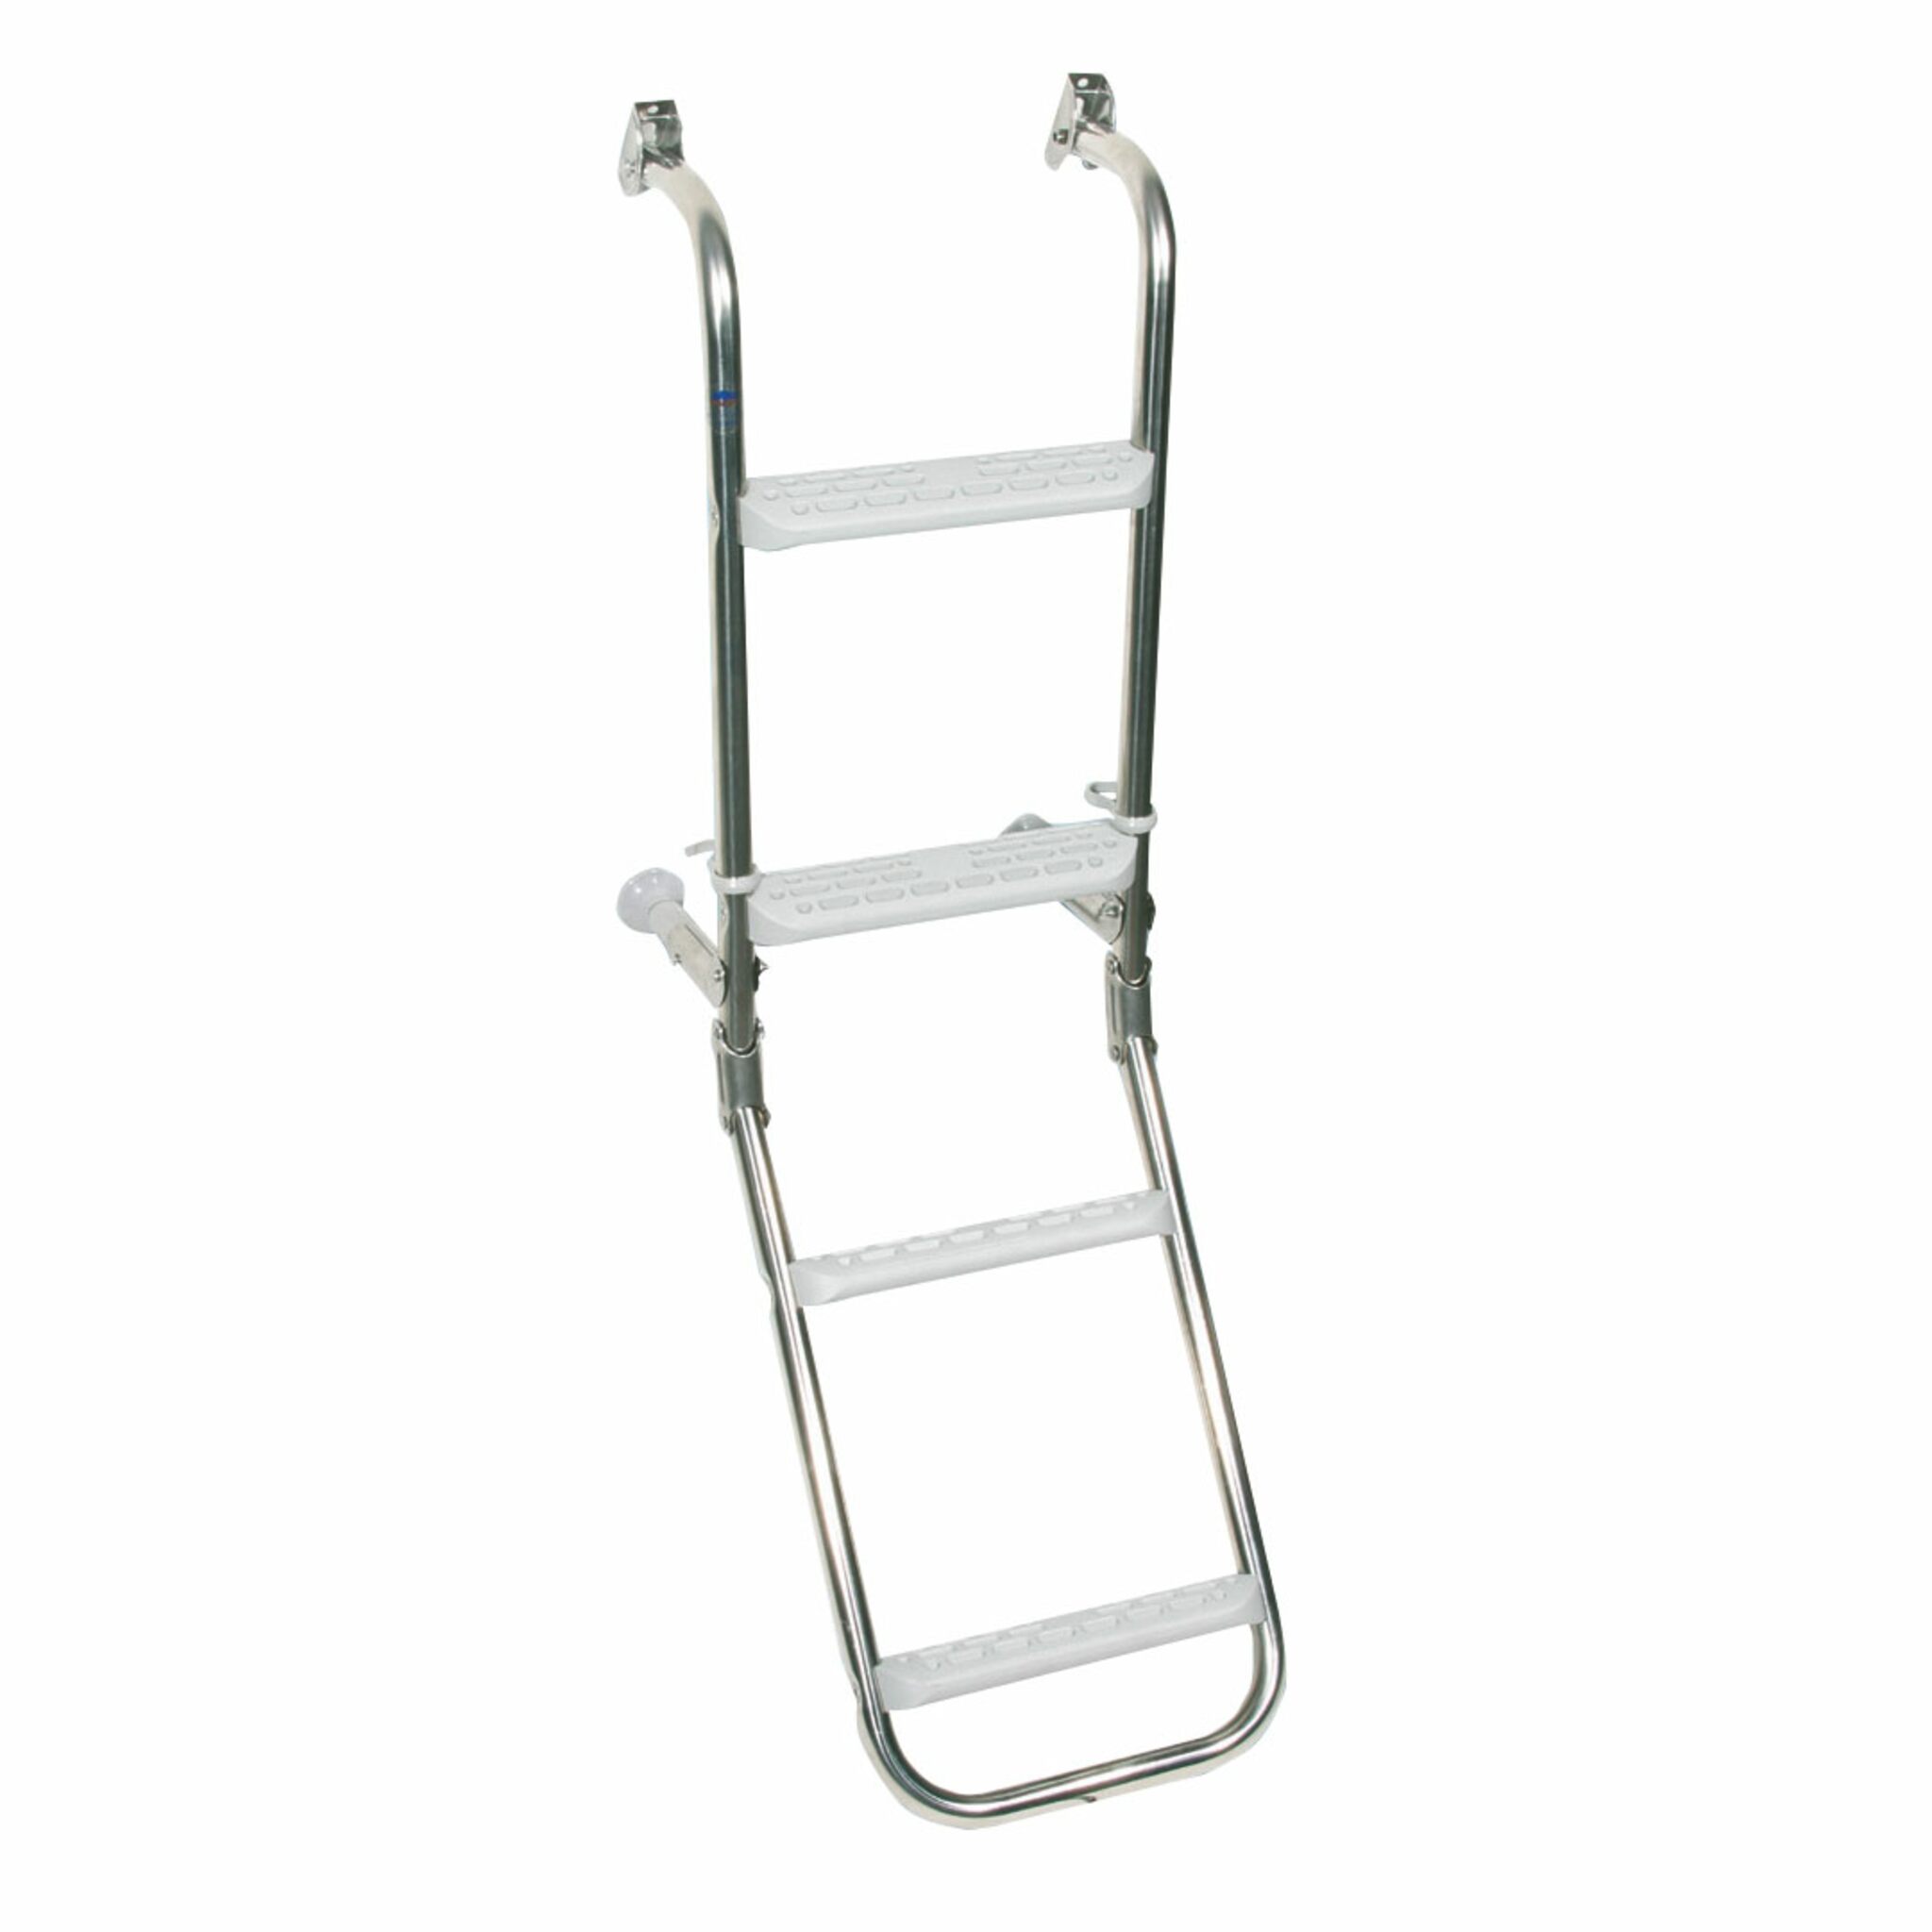 Stainless steel swimming ladder with plastic steps, 4 or 5 steps